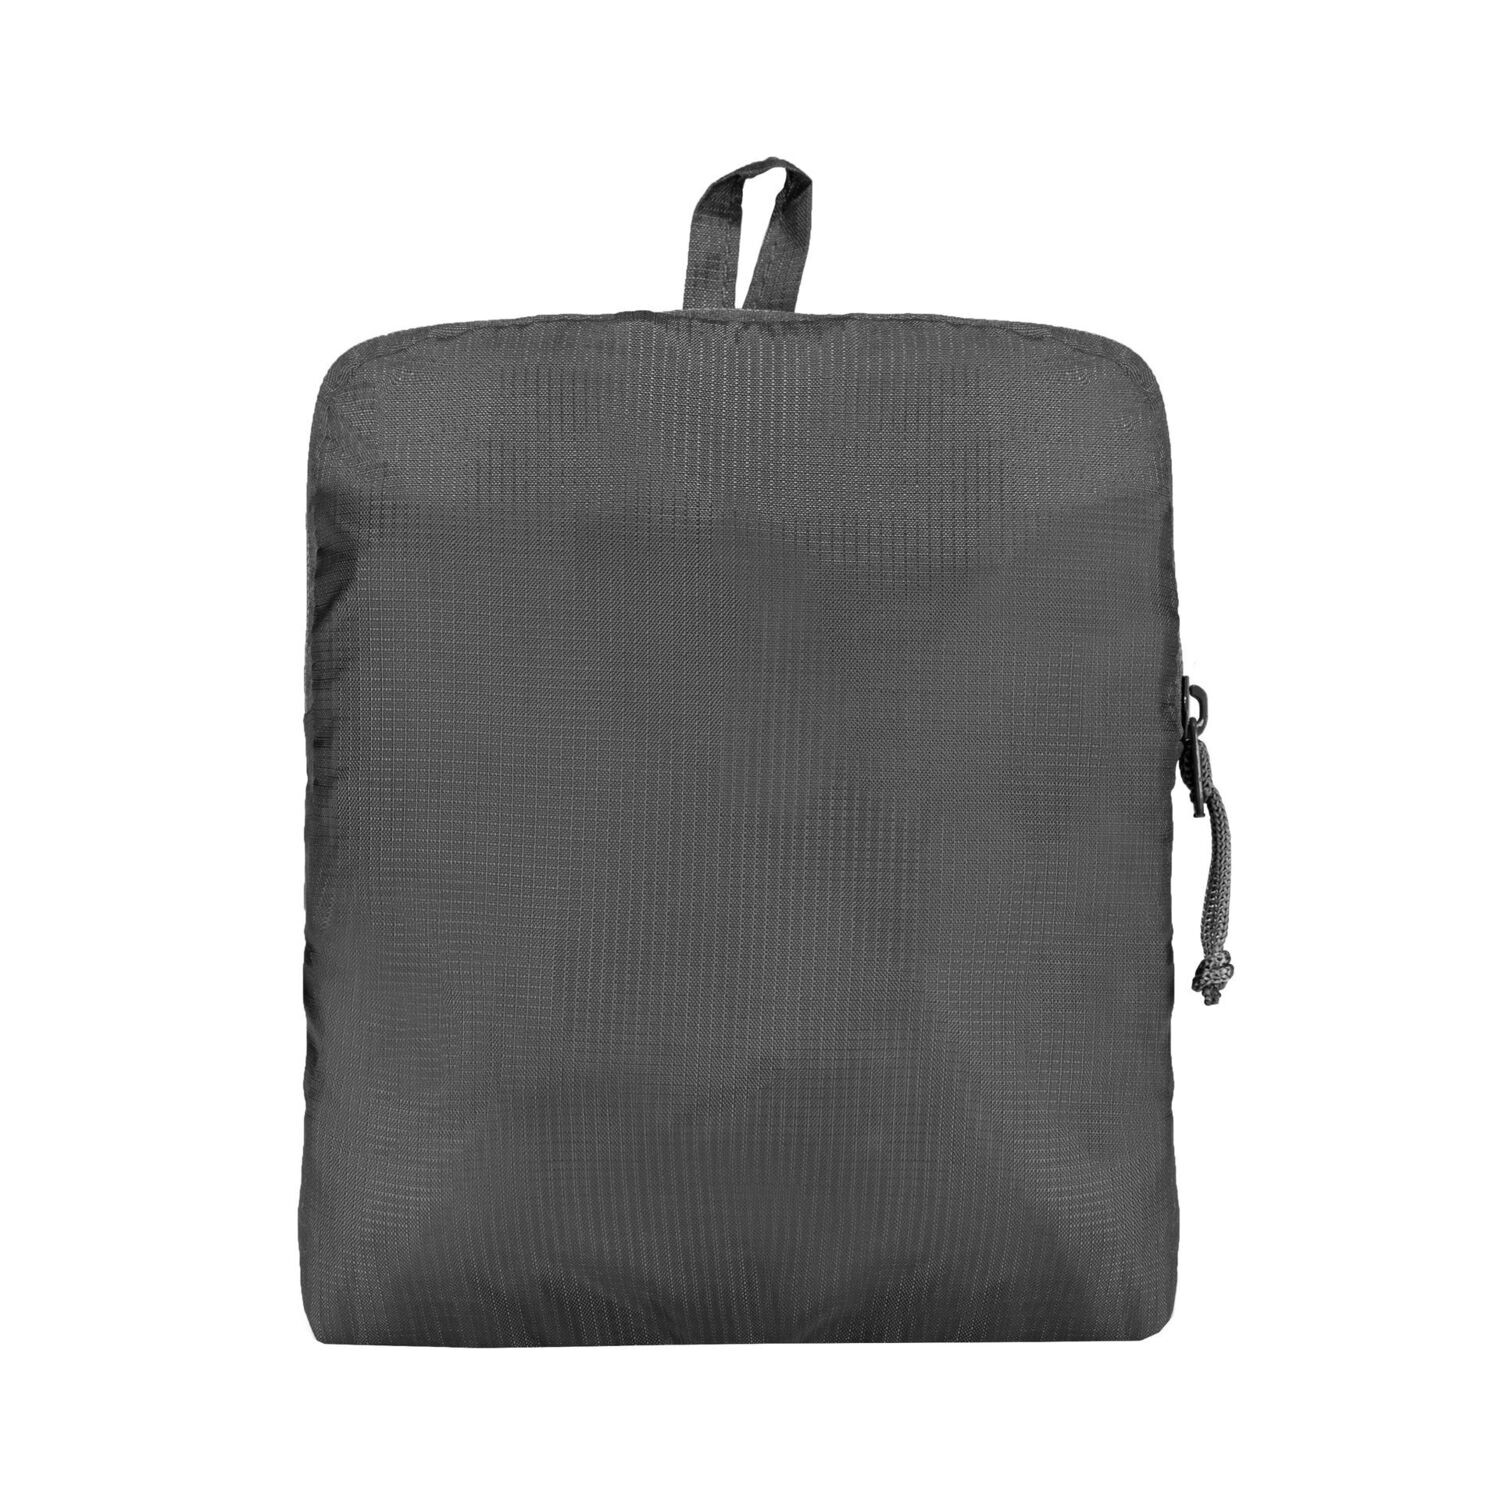 14.5L Packable Insulated Tote/Olive-Gray